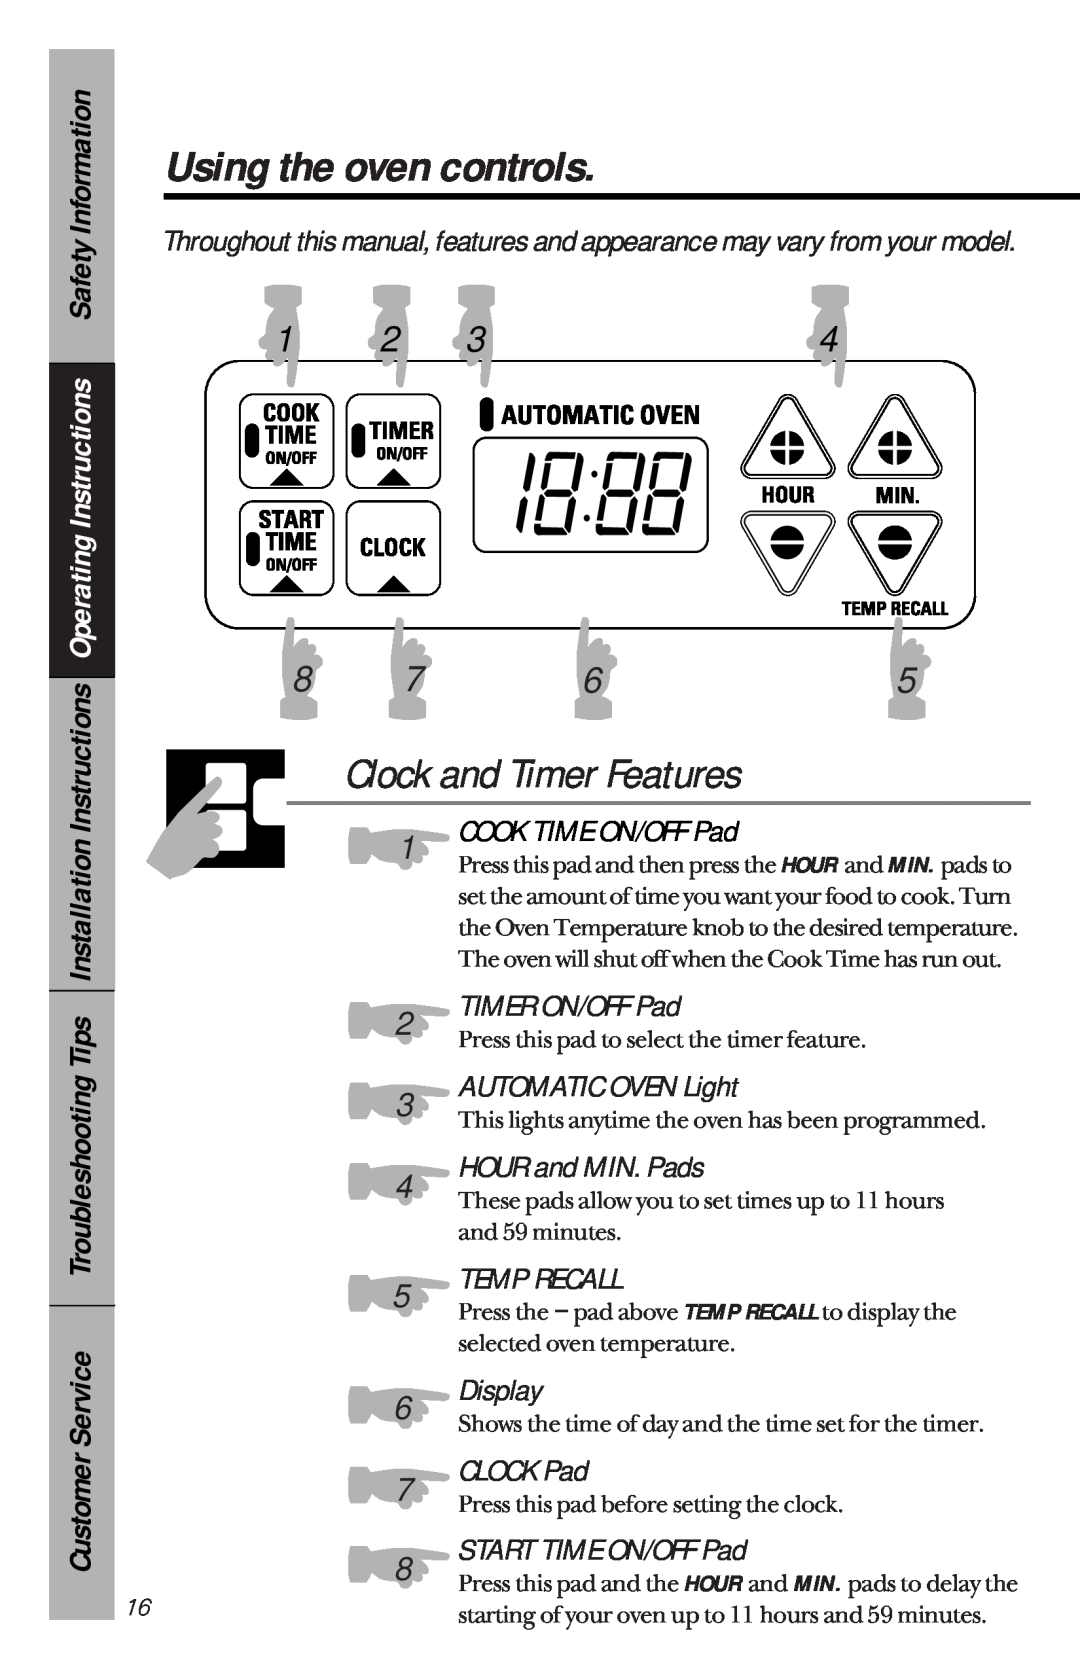 GE 164D3333P150 Using the oven controls, Clock and Timer Features, COOK TIME ON/OFF Pad, TIMER ON/OFF Pad, Temp Recall 